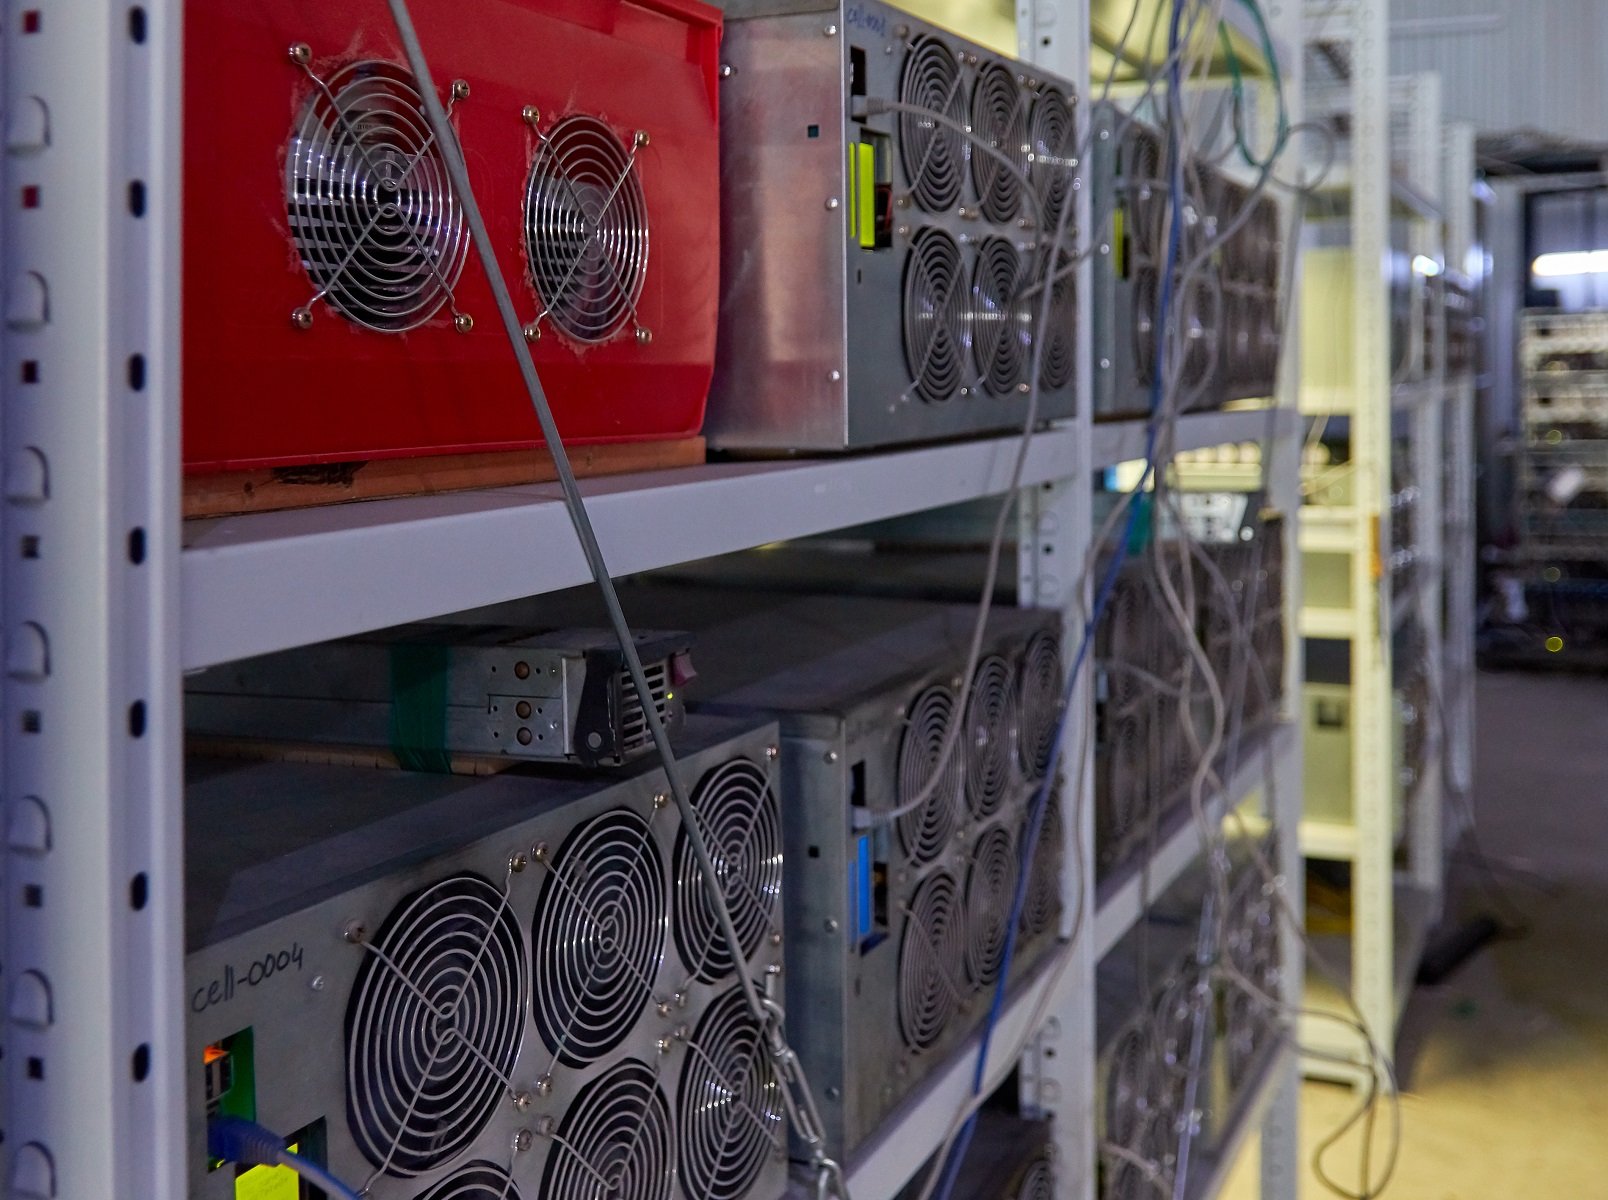 China Takes Bitcoin Mining Out of Unwanted Industries List